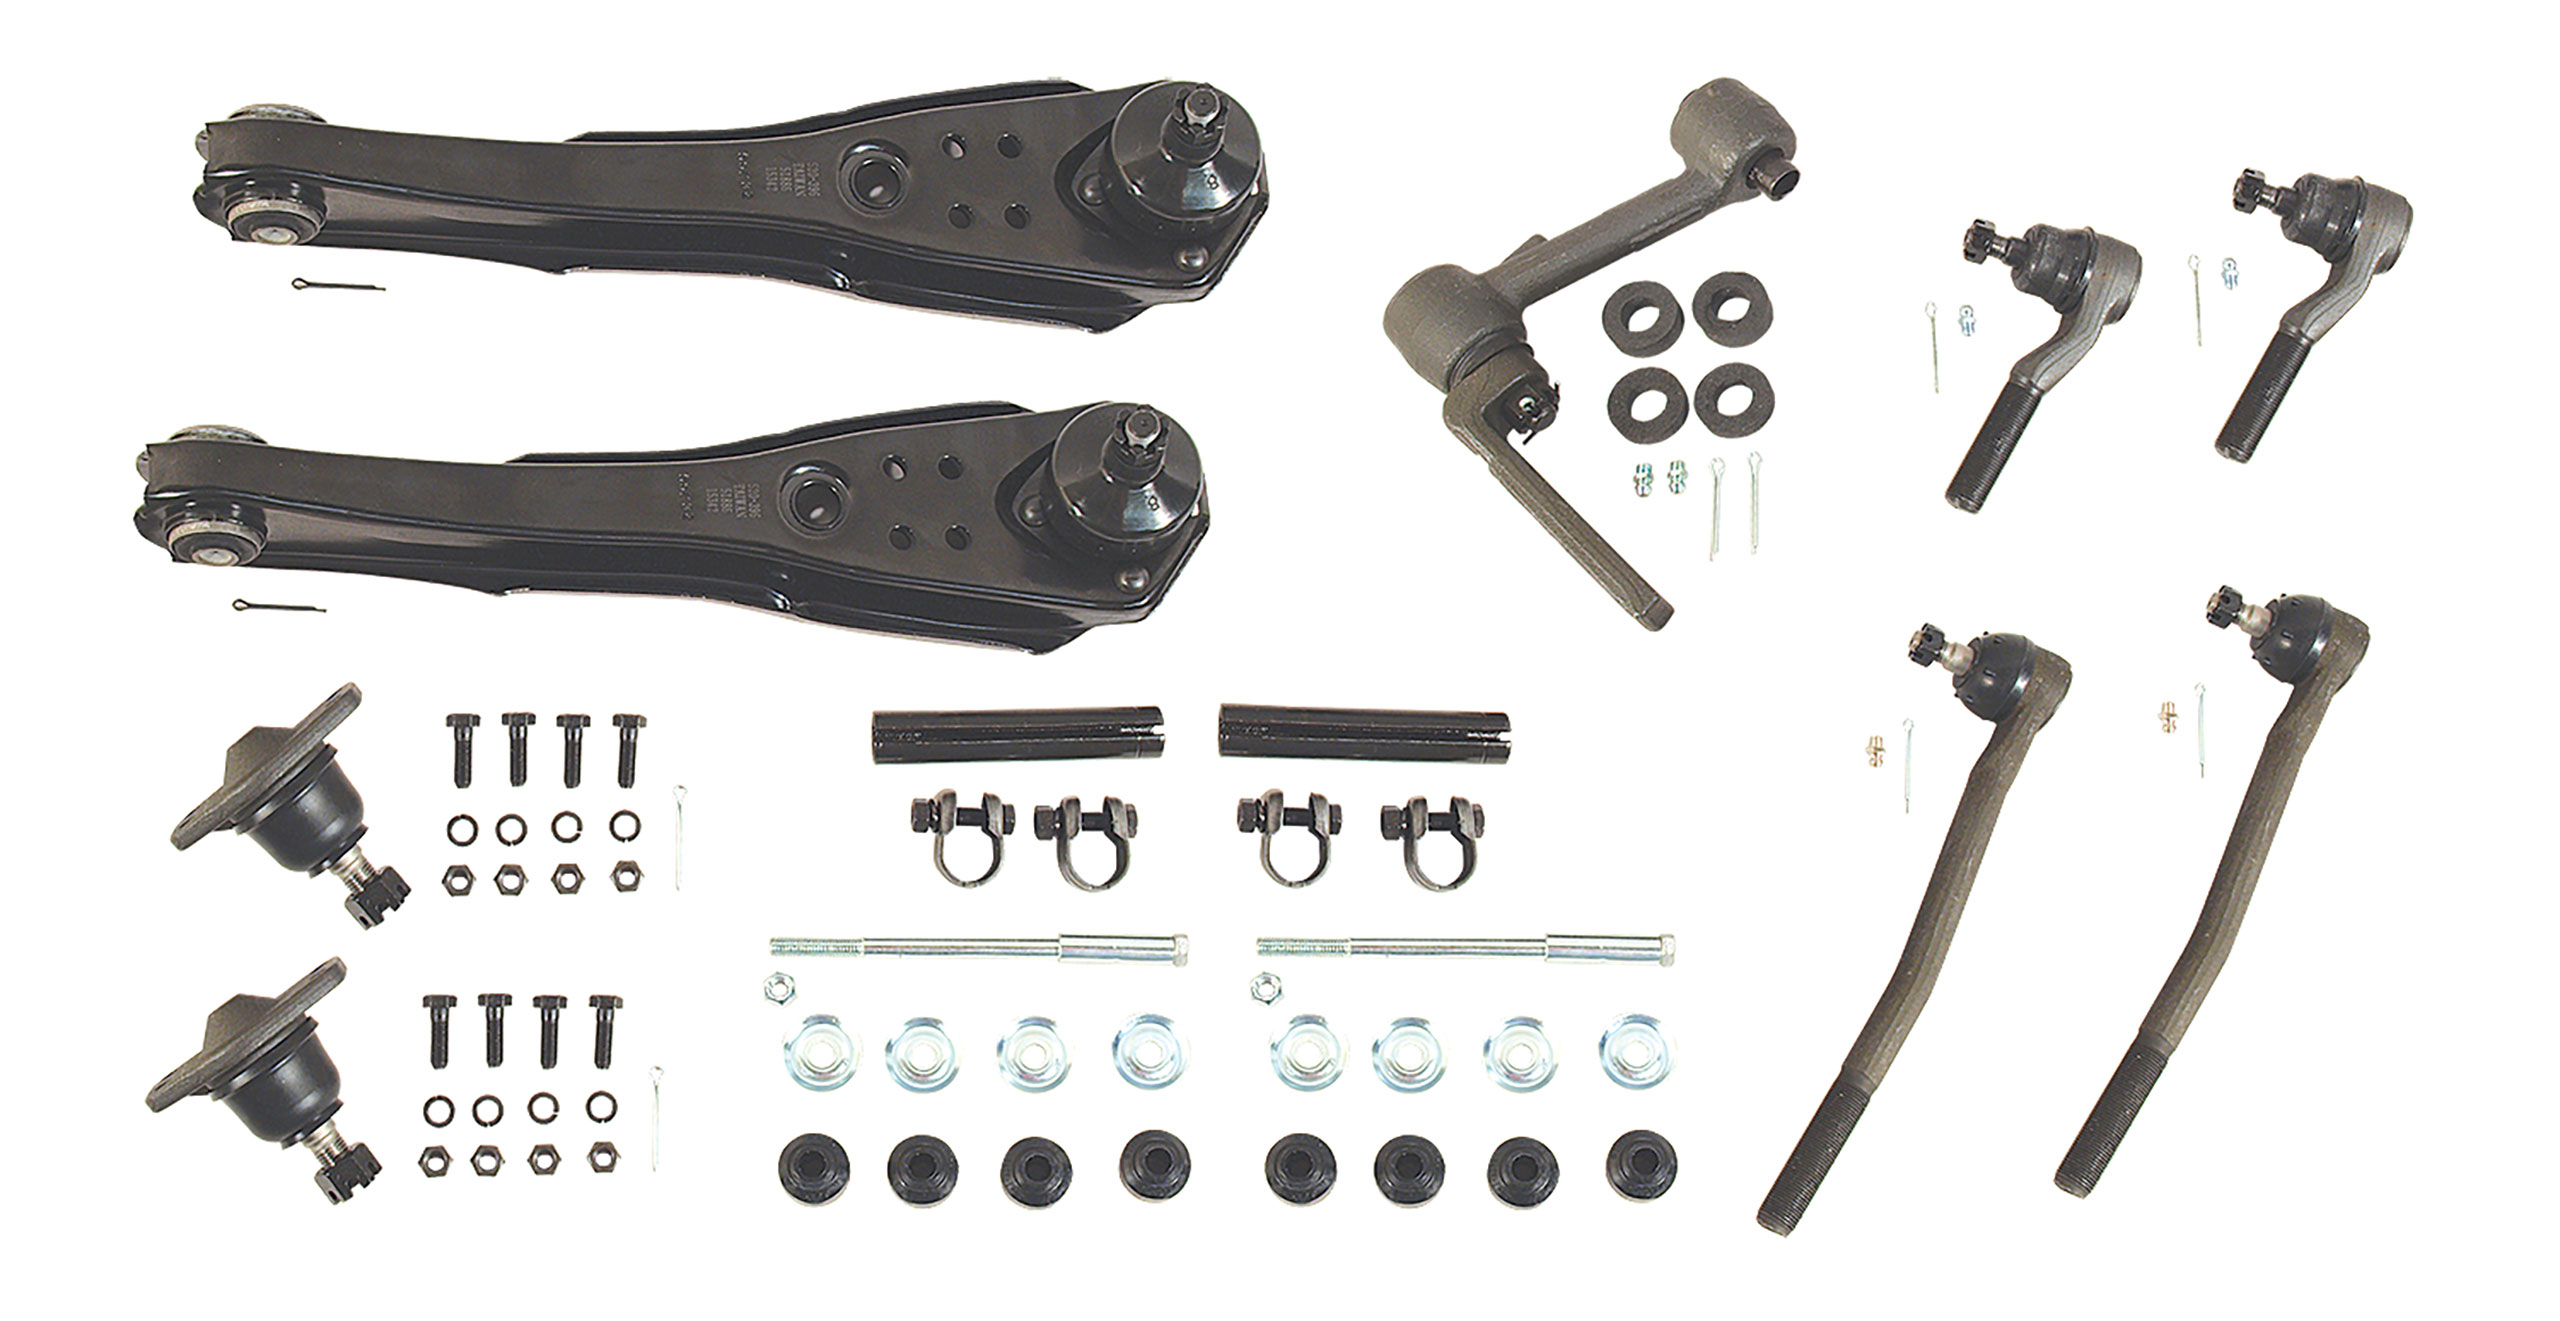  67 Mustang C2 Front Suspension Rebuild Kit Deluxe 4 Bolt Upper Ball Joint CA-MA17015